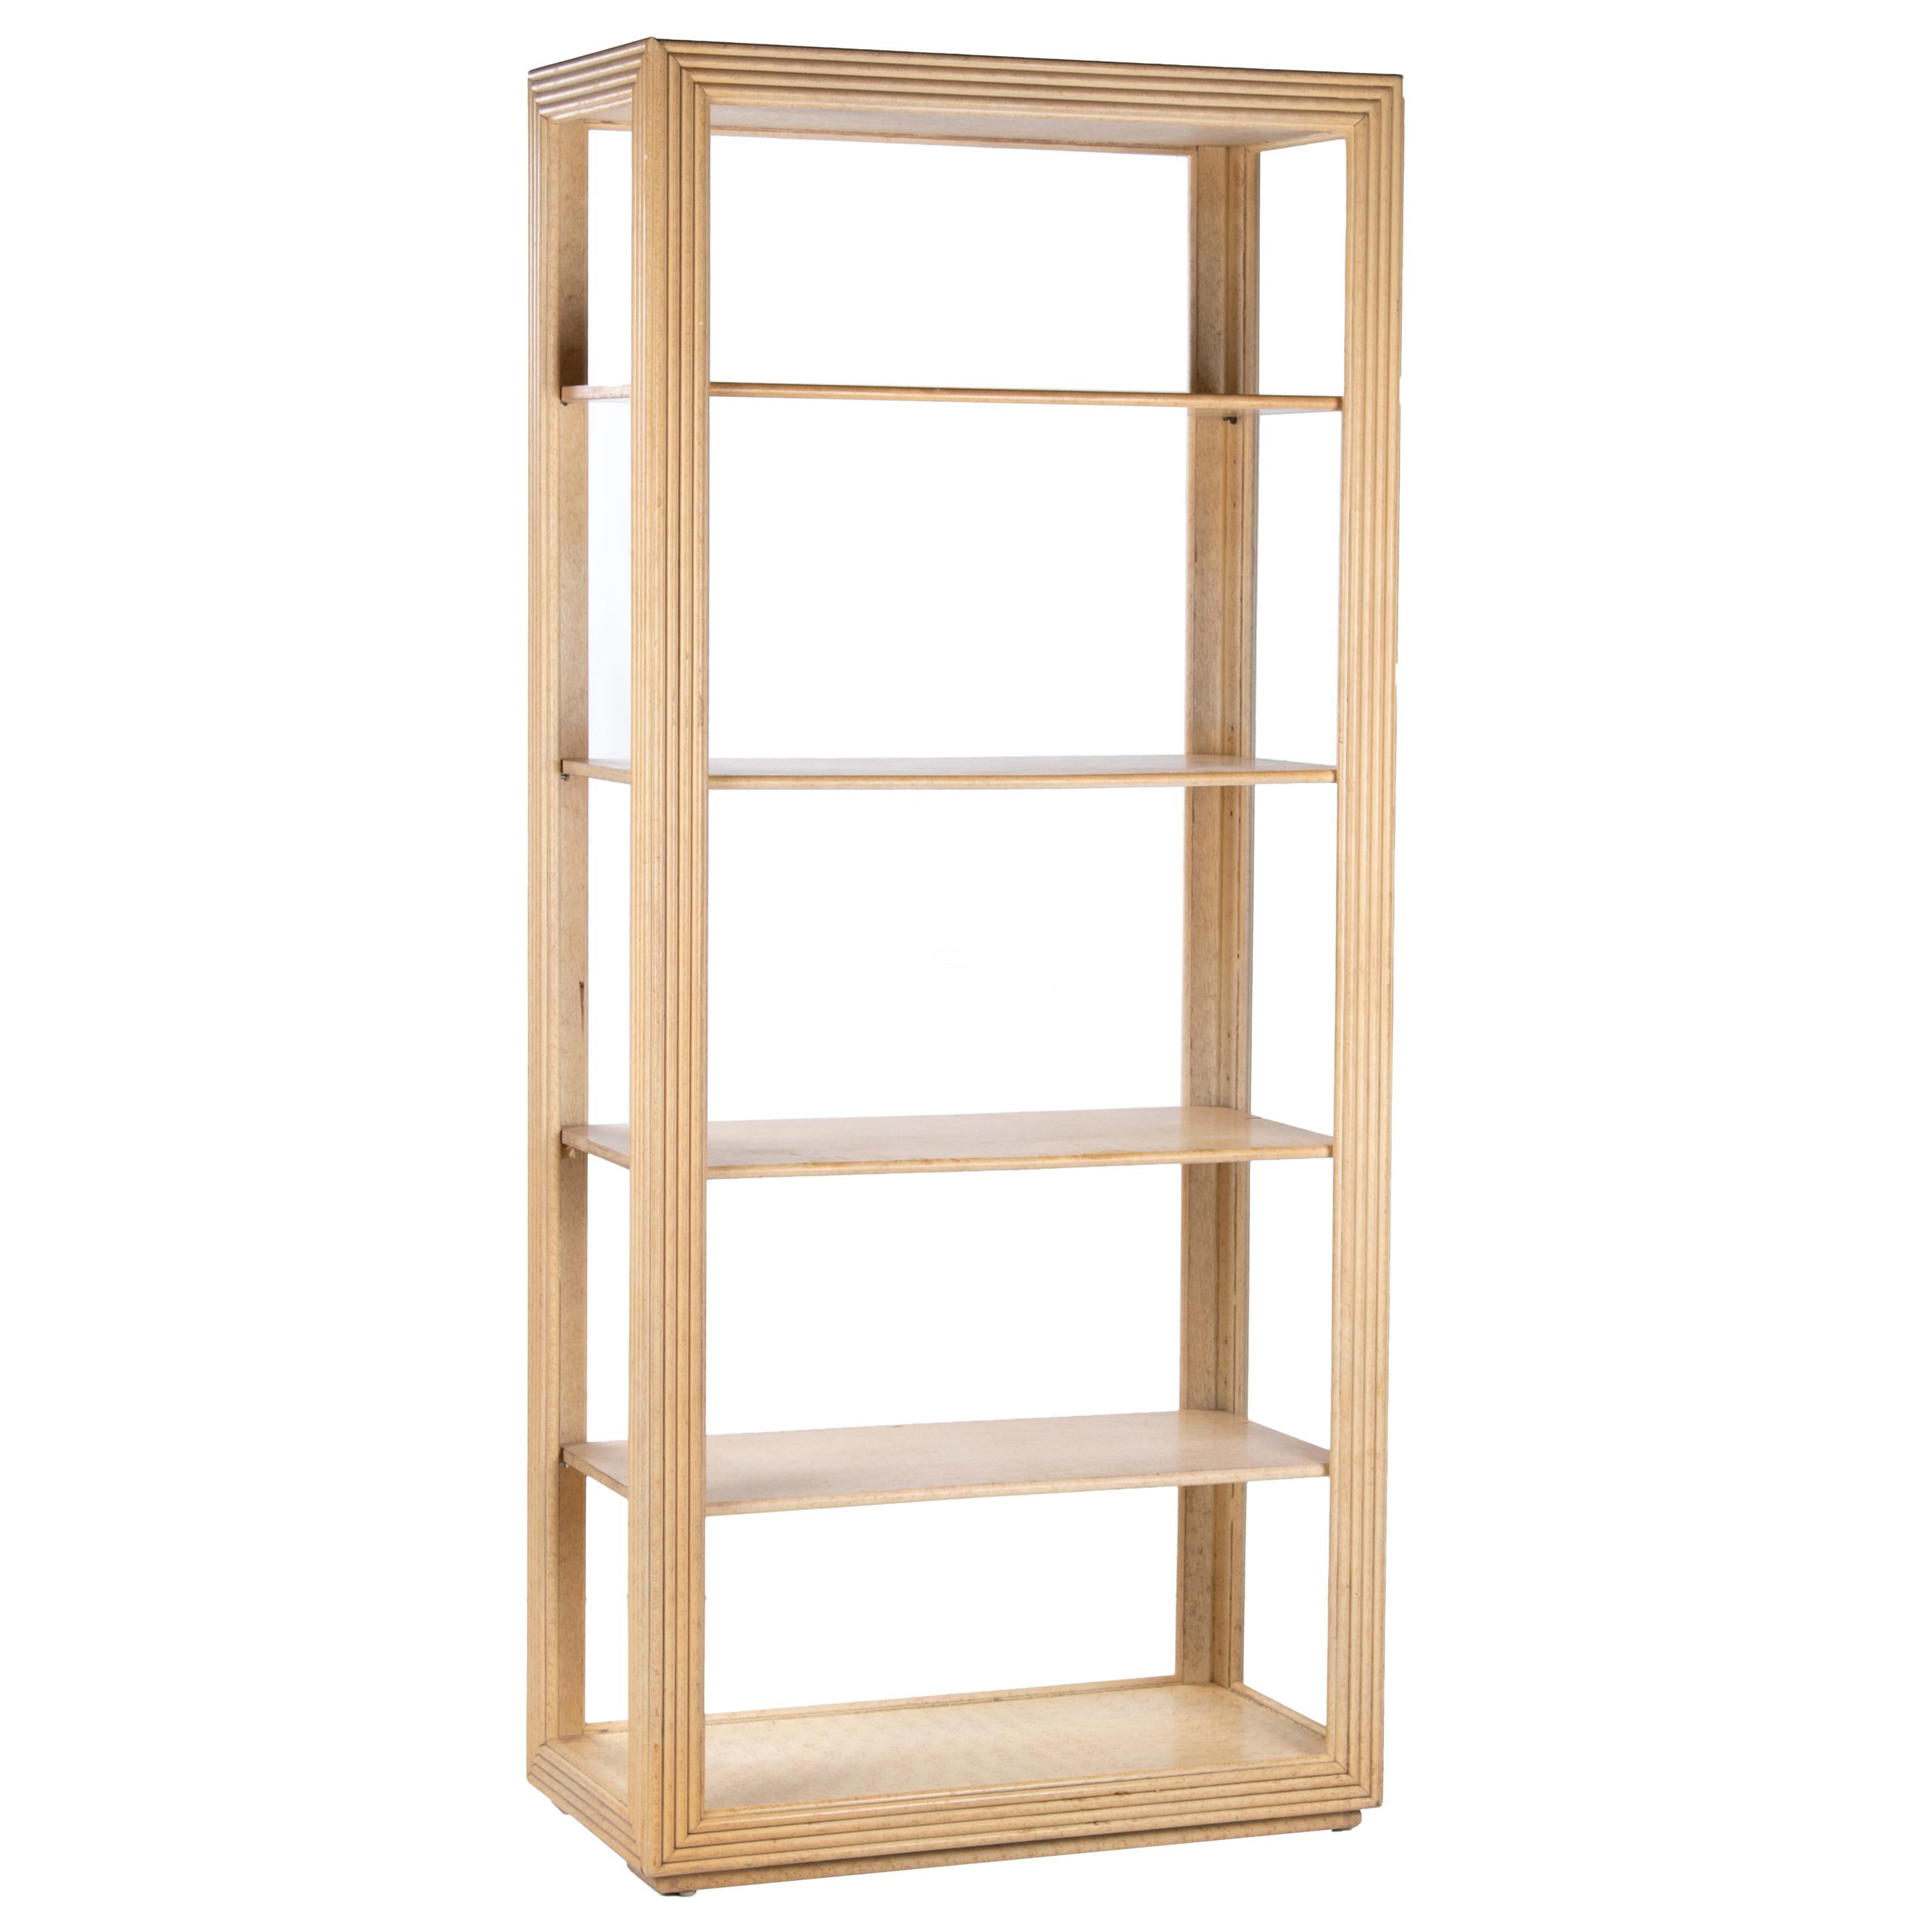 1970s Harrods of London Bamboo Five Shelf Bookcase For Sale